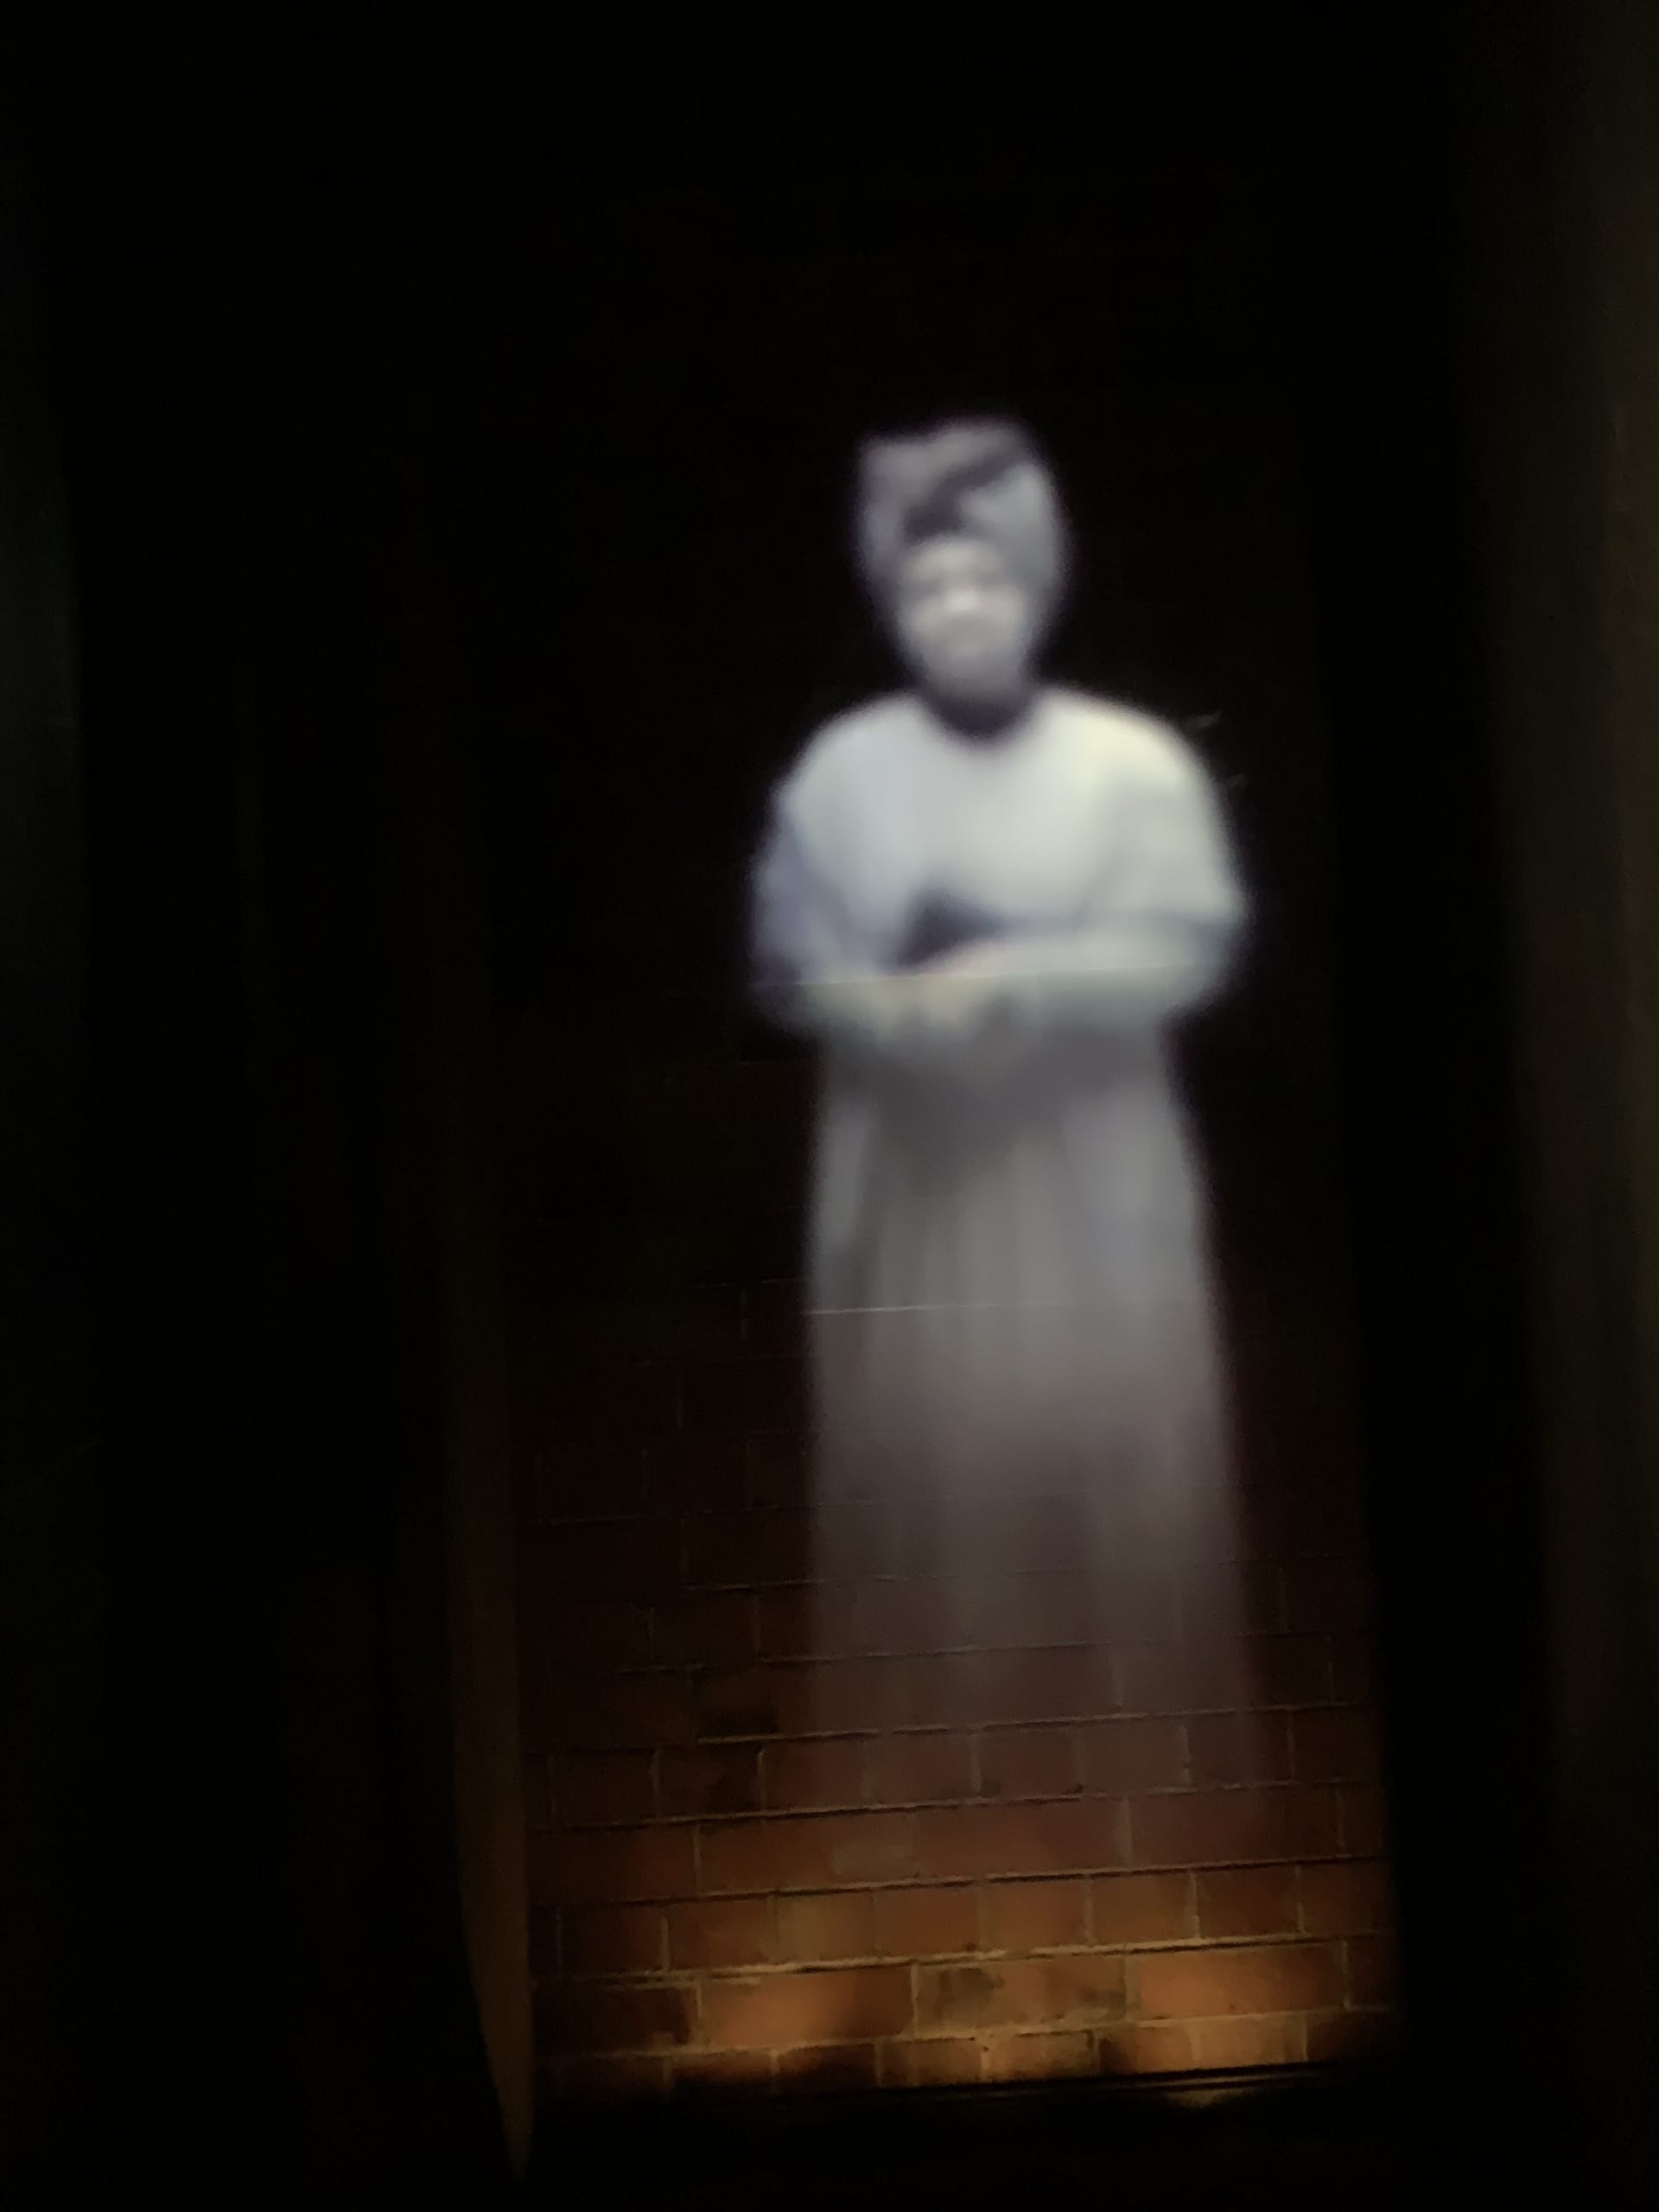 opening installations of holograms with voices speaking accounts of slaves in holding cells before auction